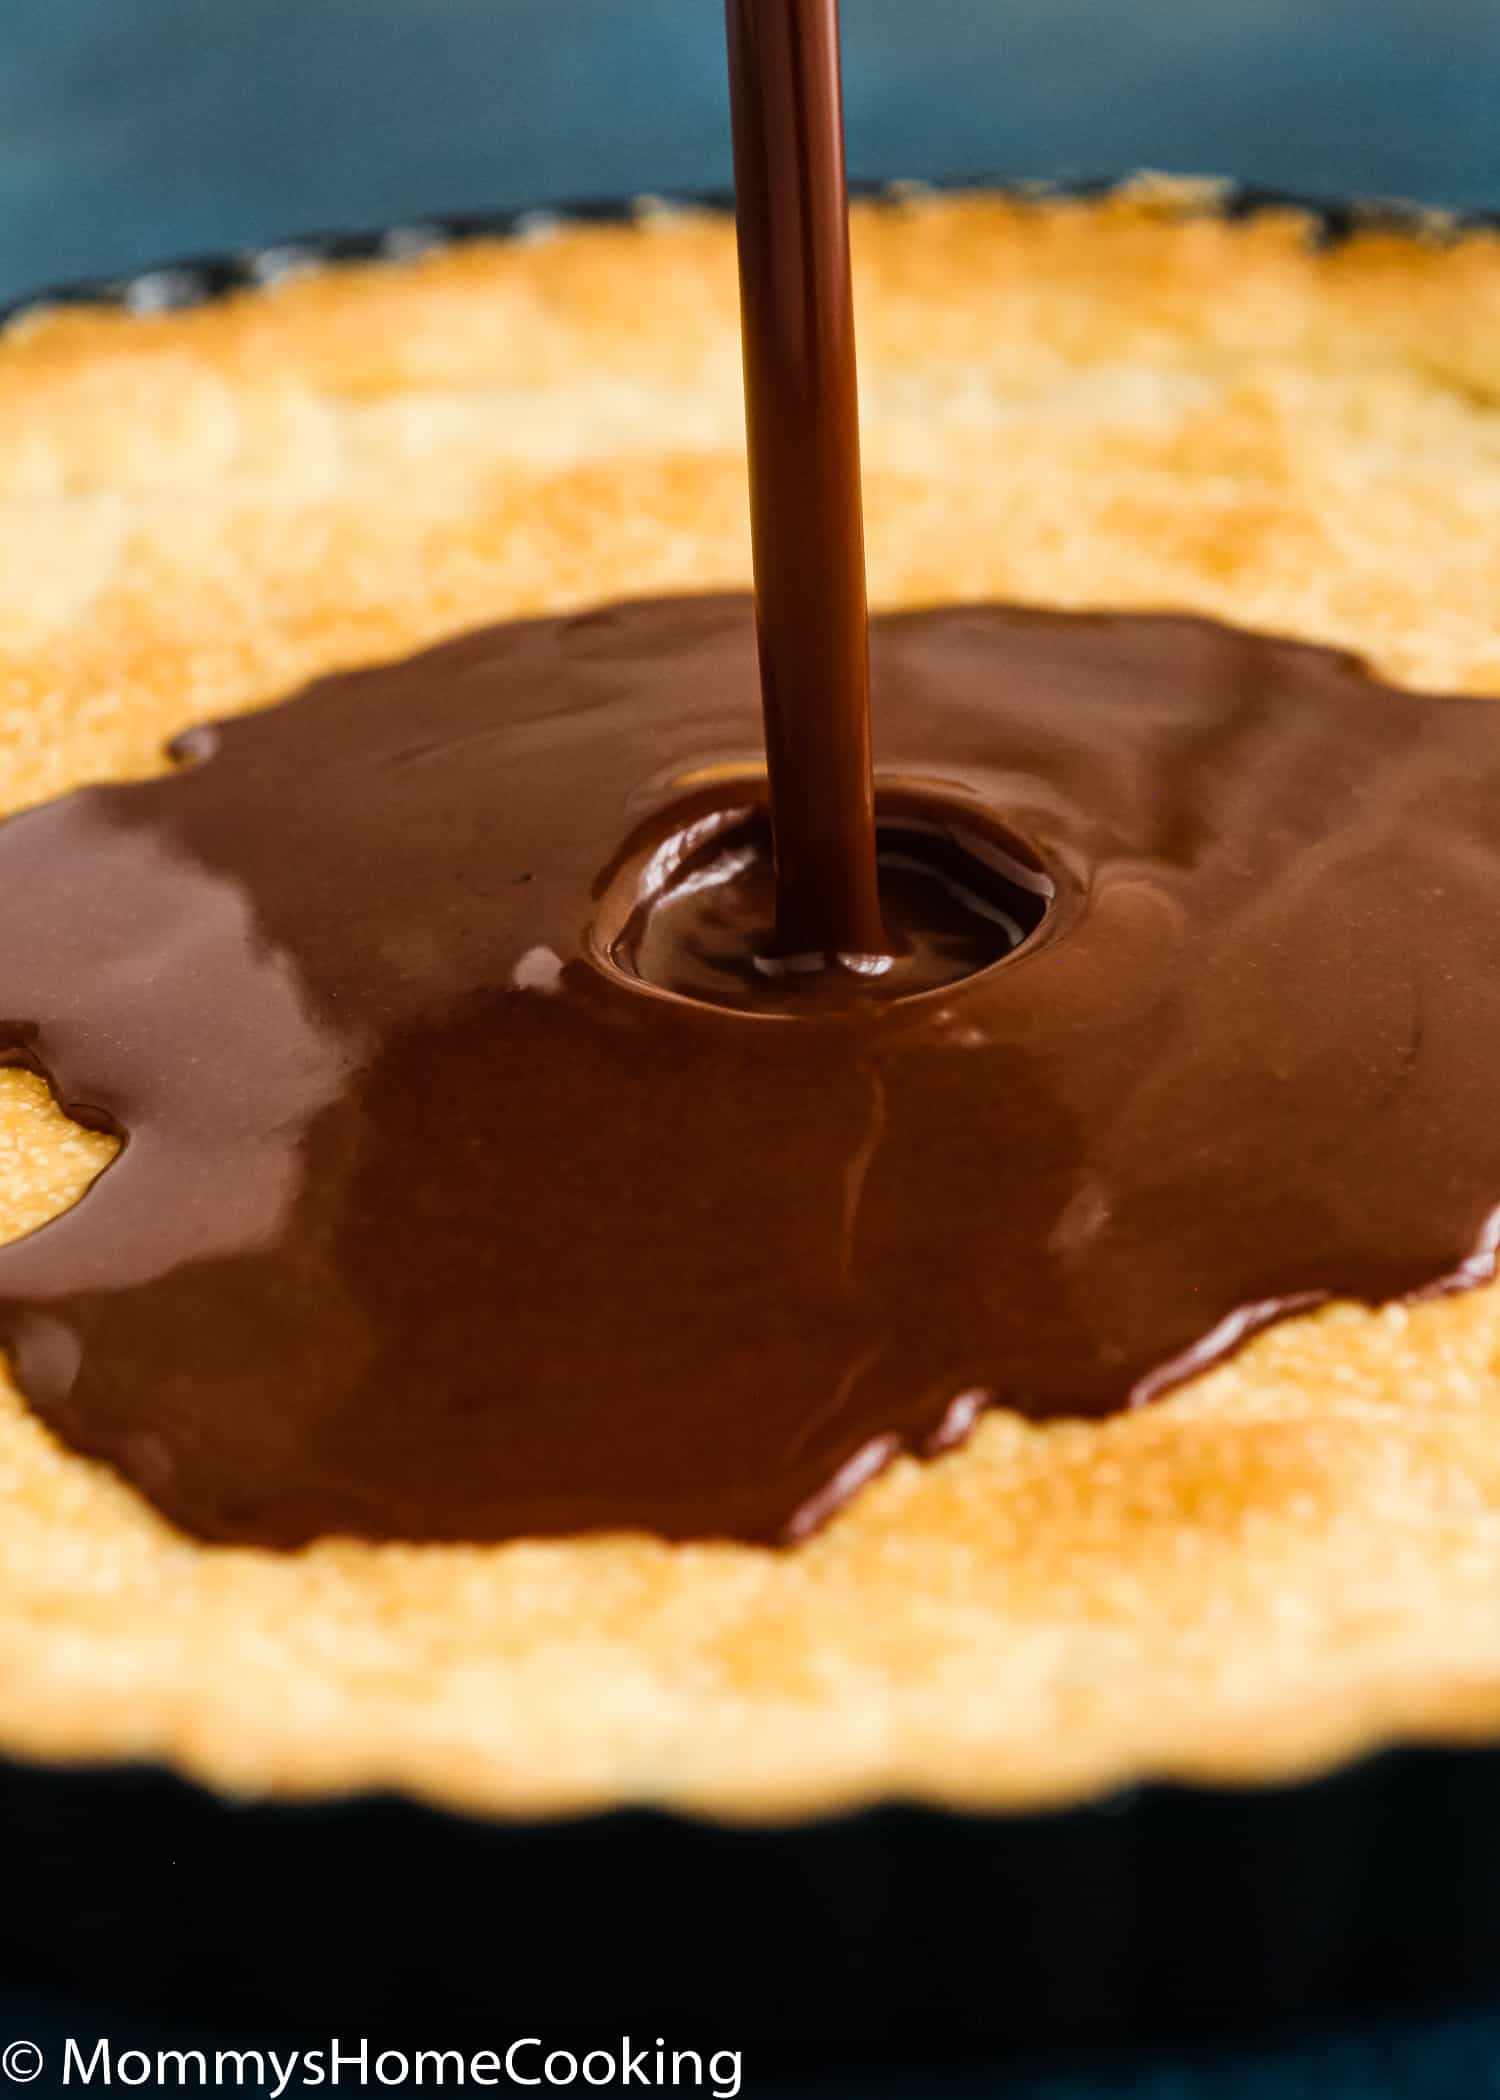 egg-free chocolate filling being poured over a tart crust.